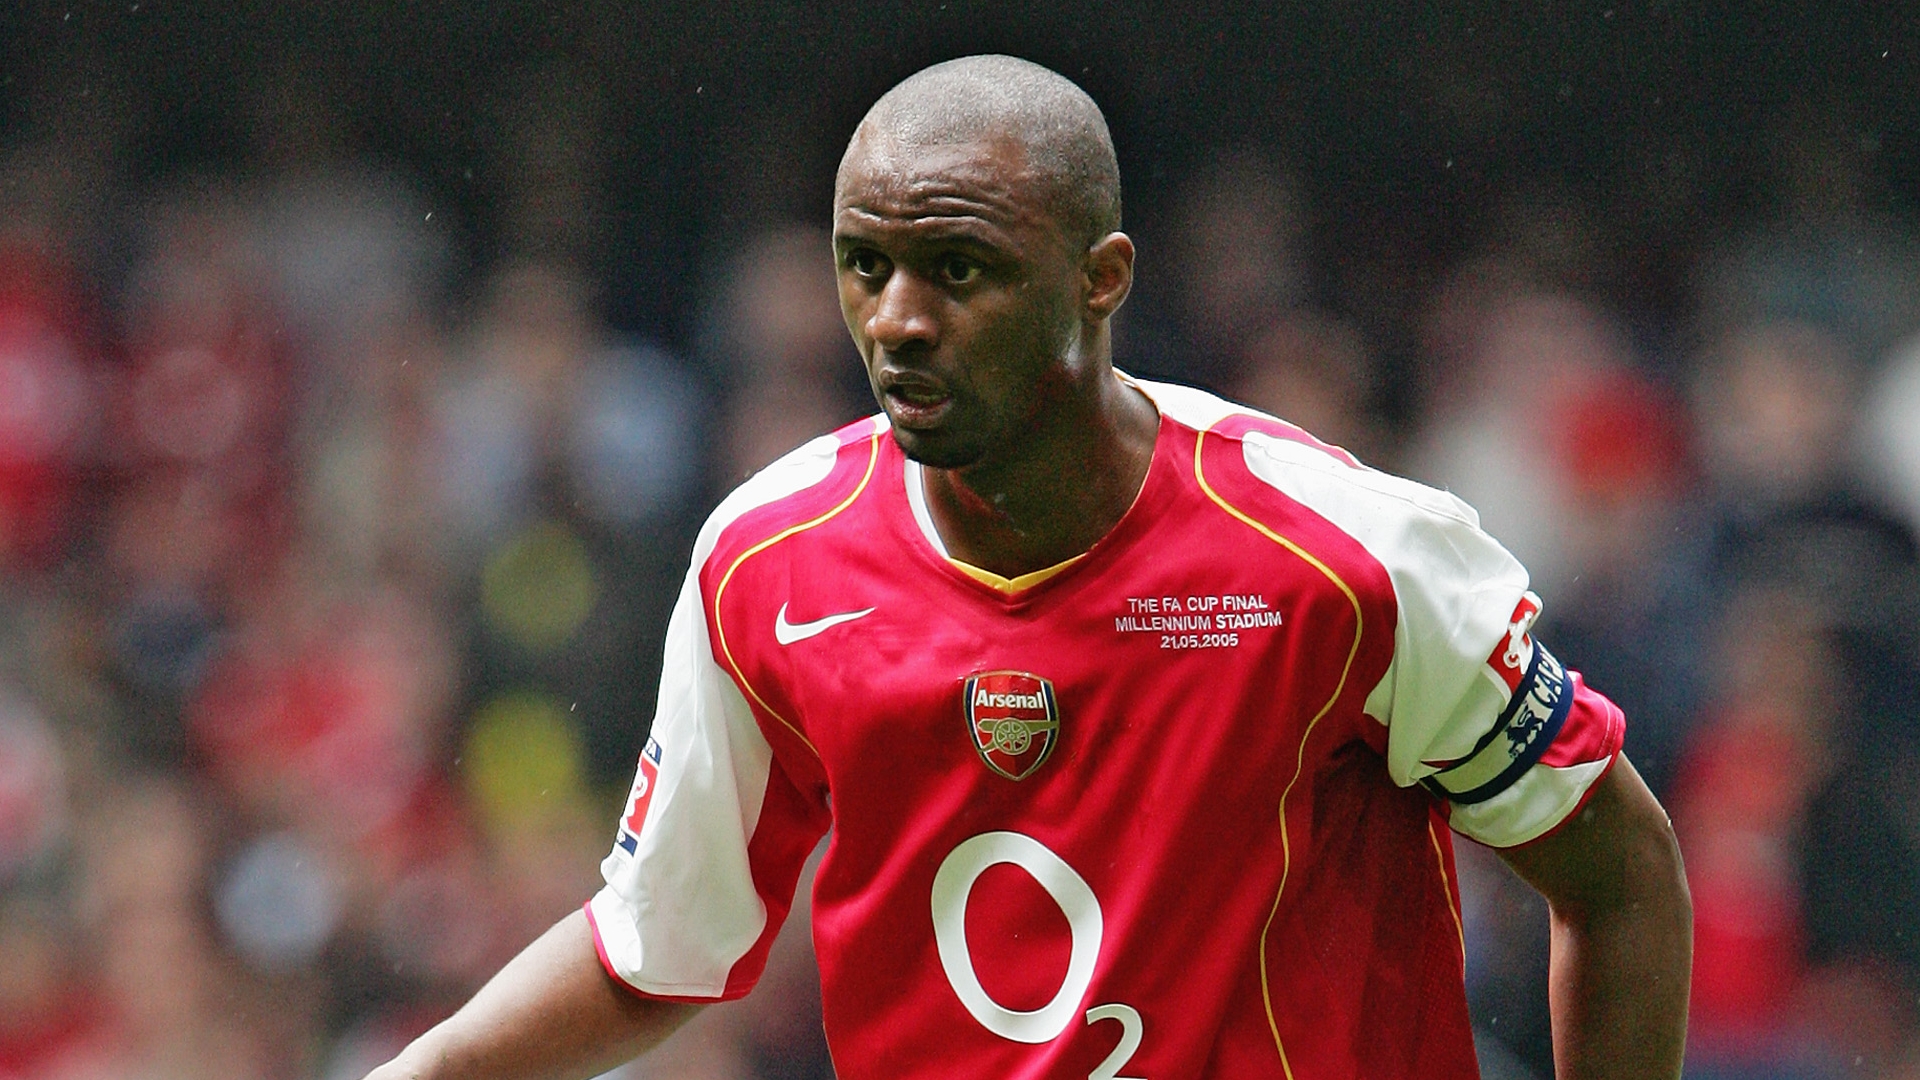 Arsenal news: Patrick Vieira backed by Arsene Wenger to be future